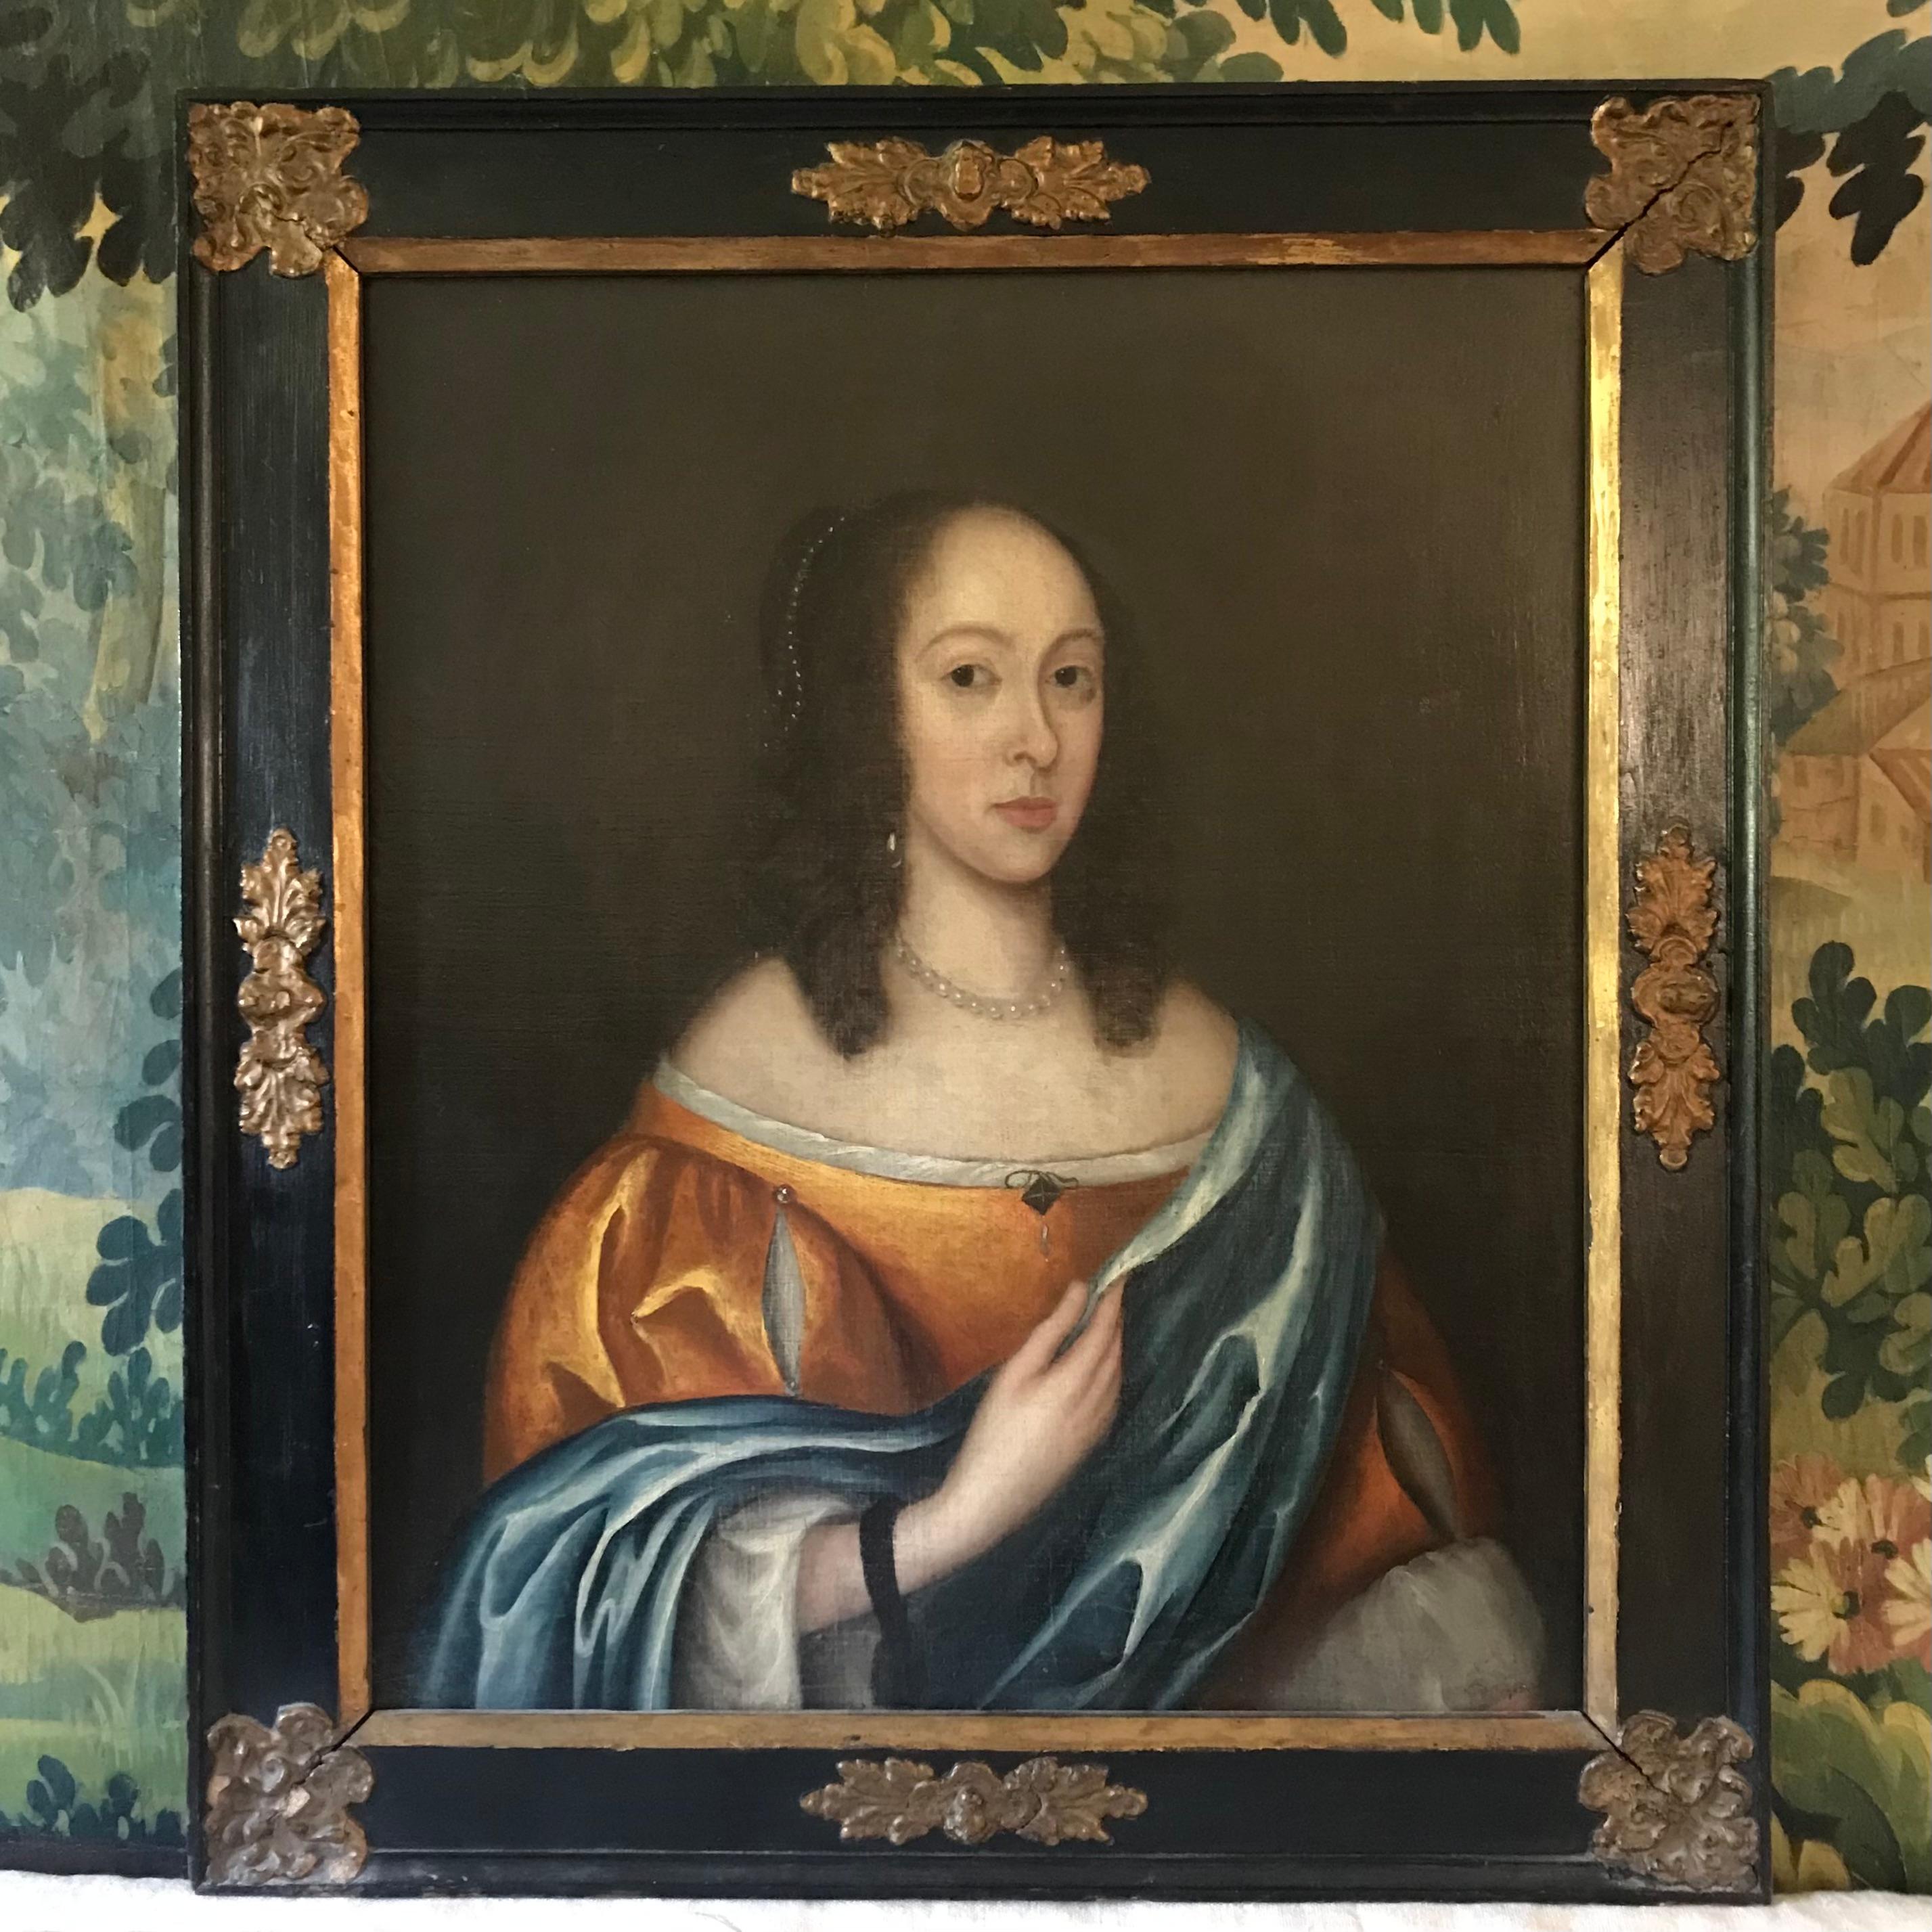 Exceptional mid 17th century portrait of a very beautiful and elegant lady - wearing dress and jewels typical of the period - sadly the sitter is unknown -  a superb quality painting in the style of Sir Godfrey Kneller who succeeded Sir Peter Levy